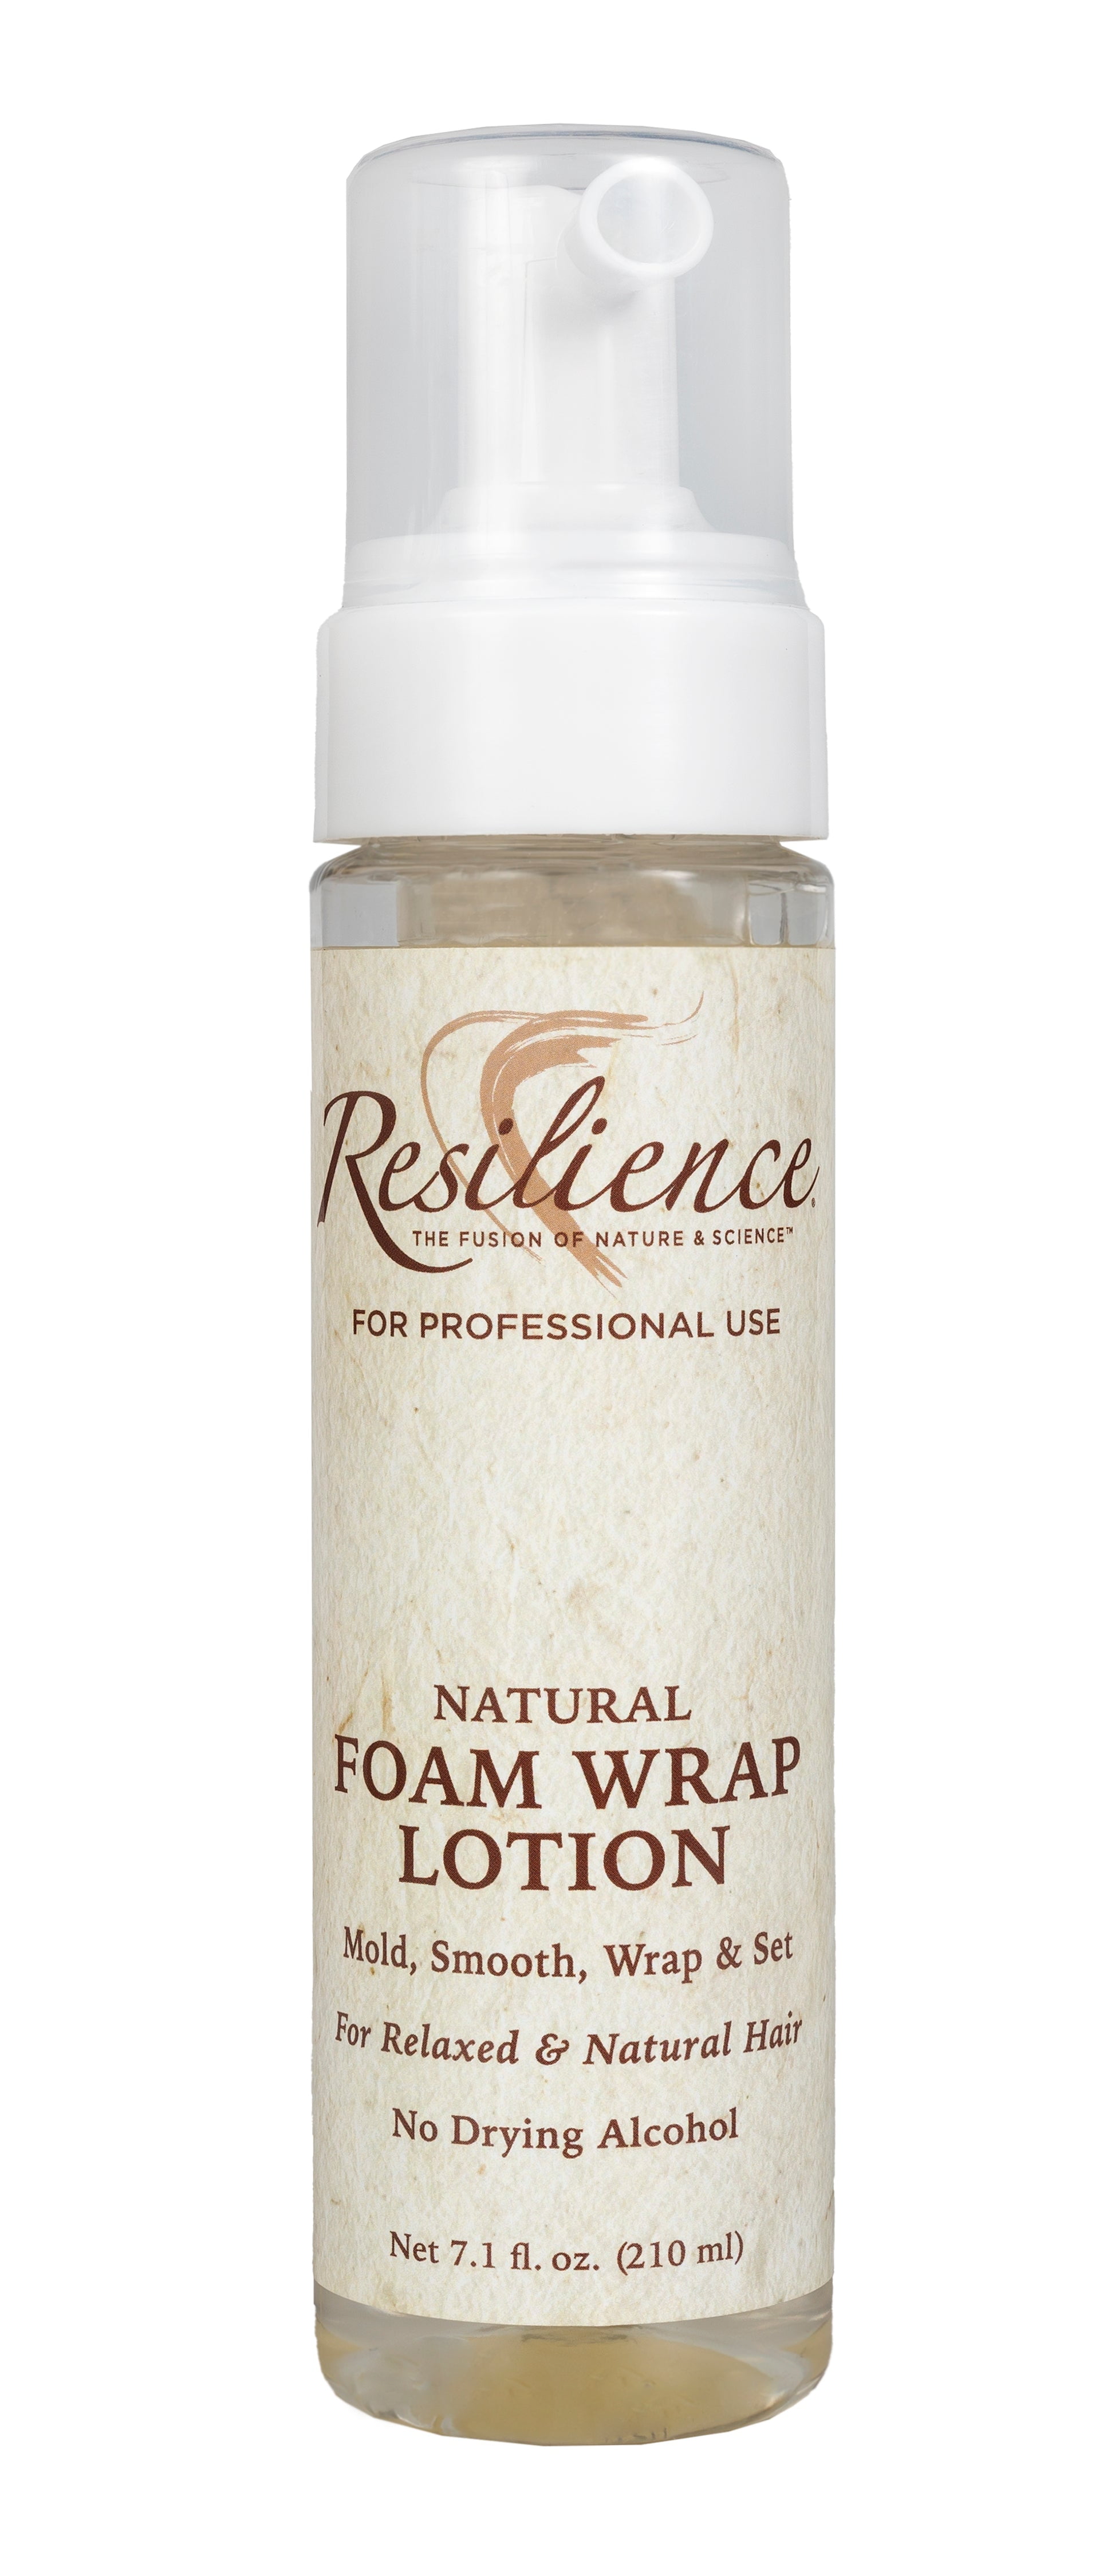 Affirm Style Right Foam Wrap Lotion